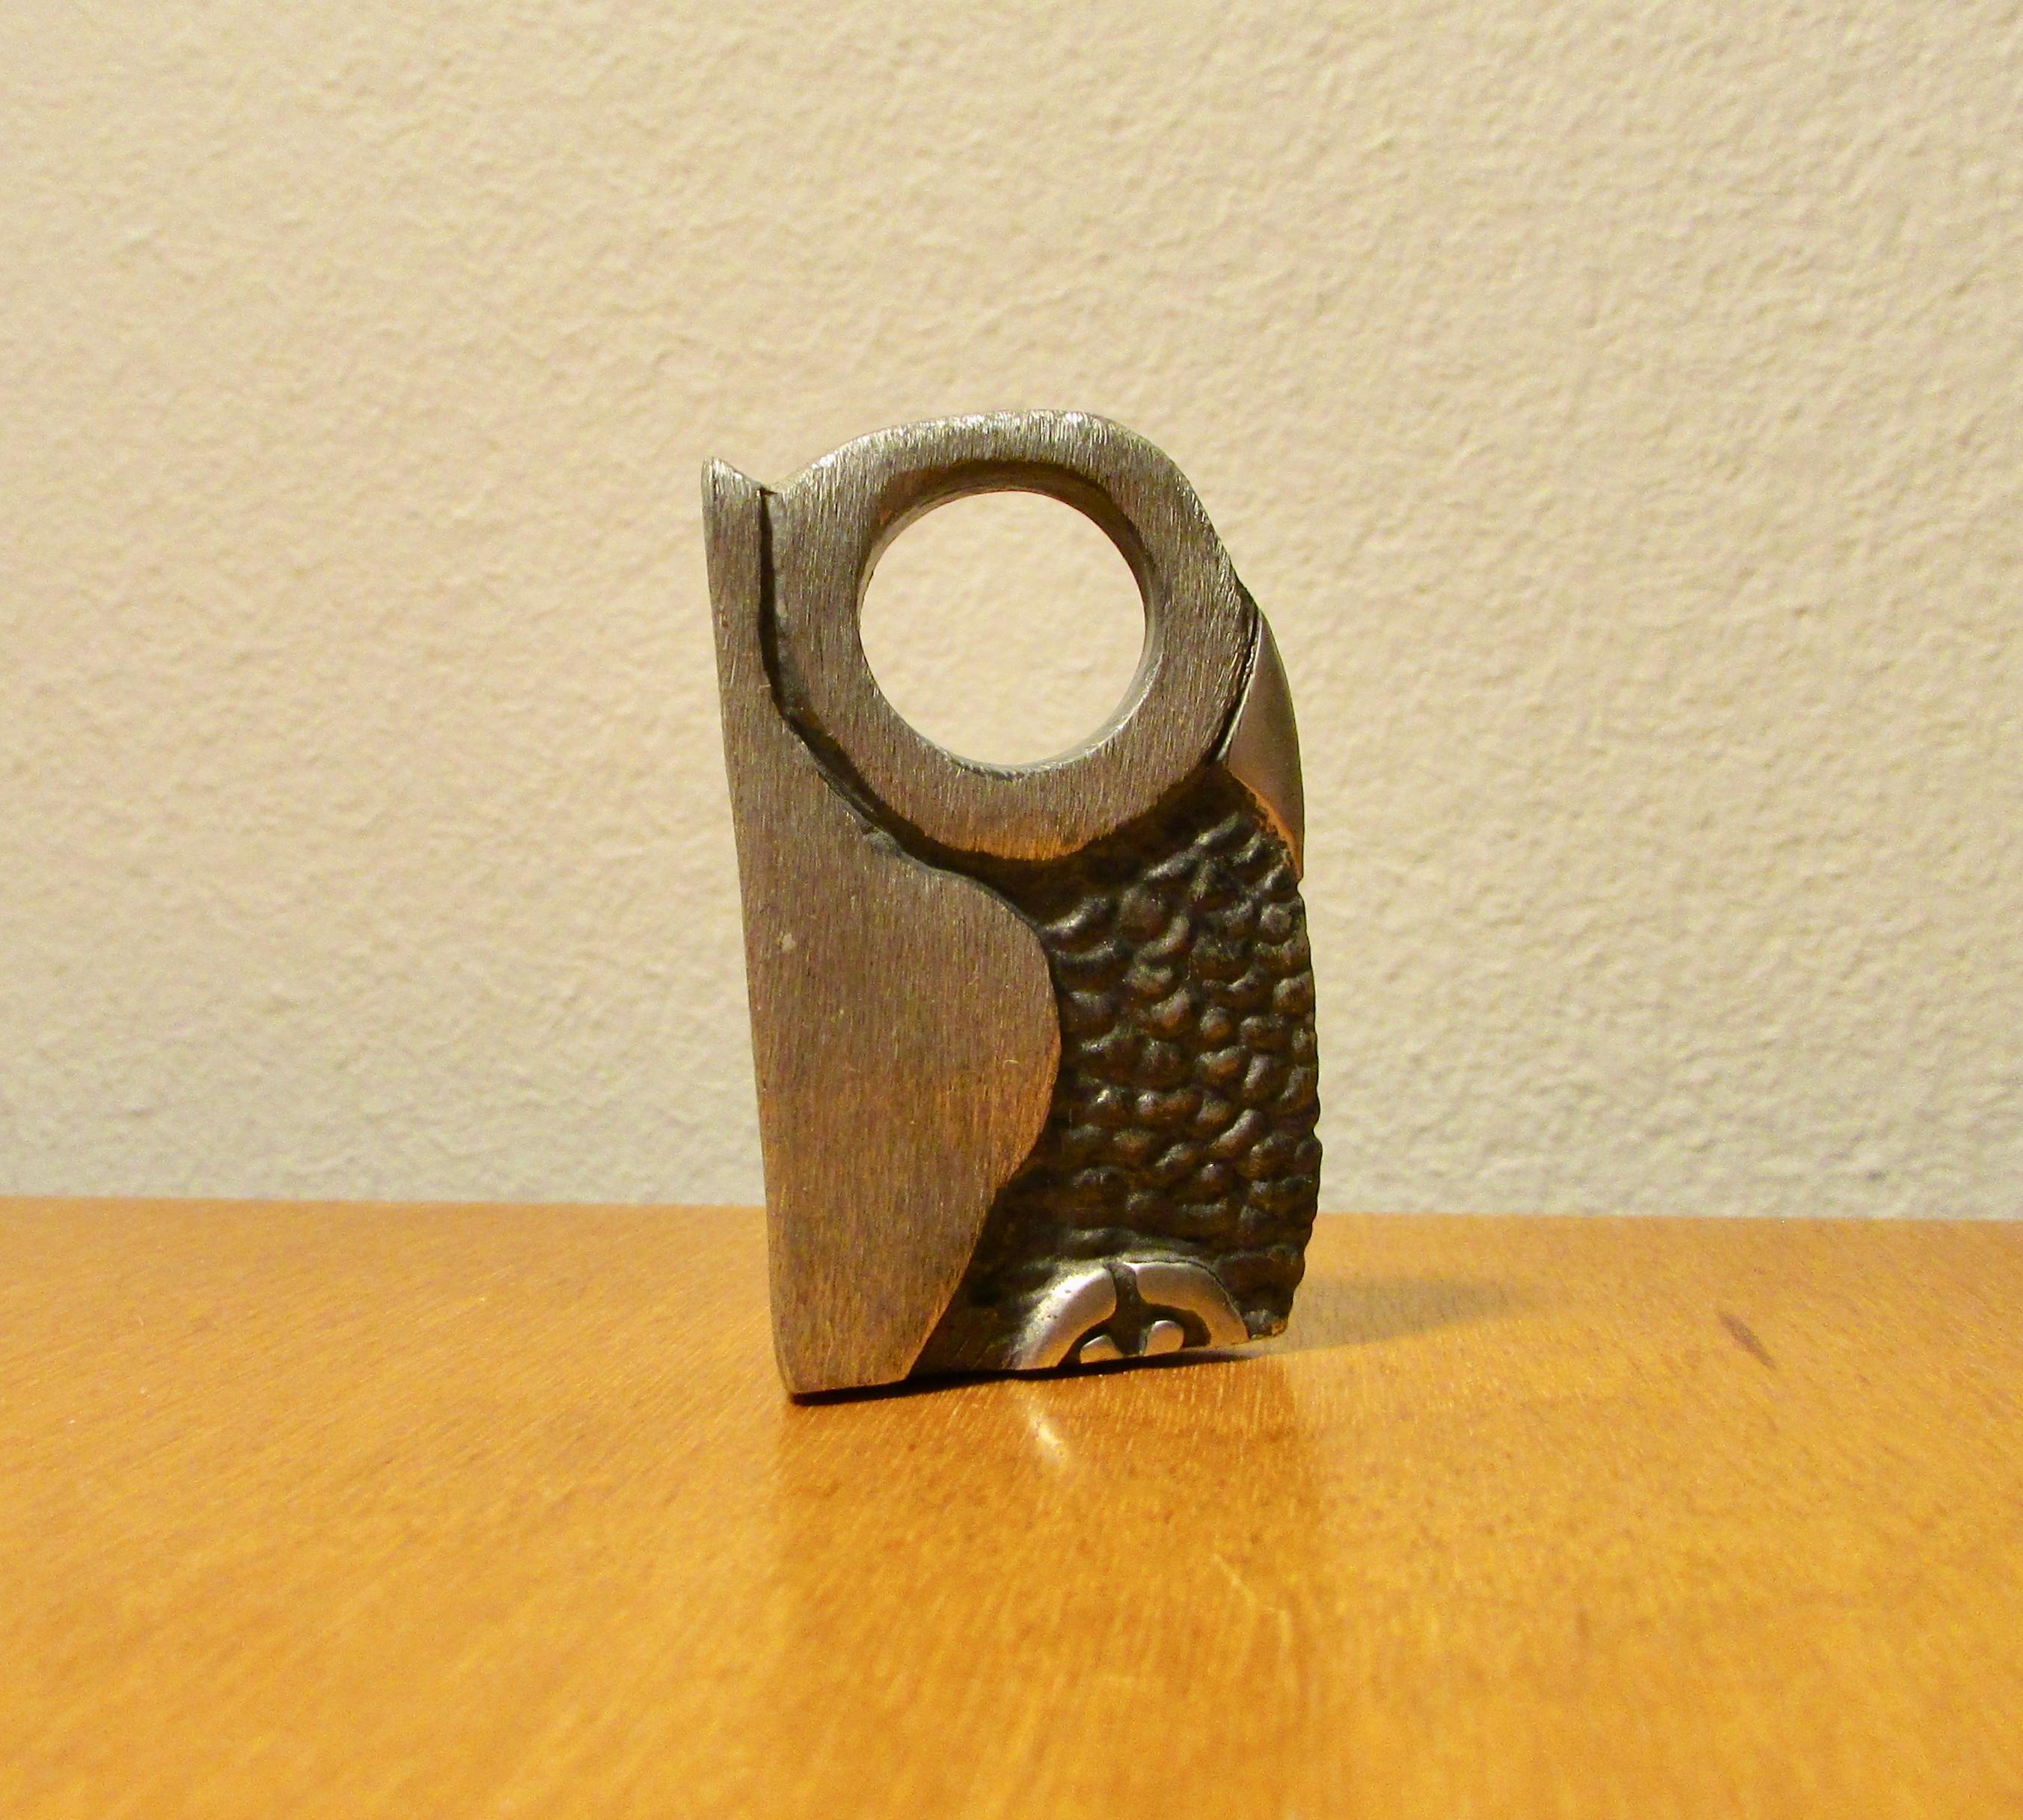 Nicely detailed diminutive metal owl sculpture for desktop or collection. Weighty - possibly pewter. Signed Clarence.